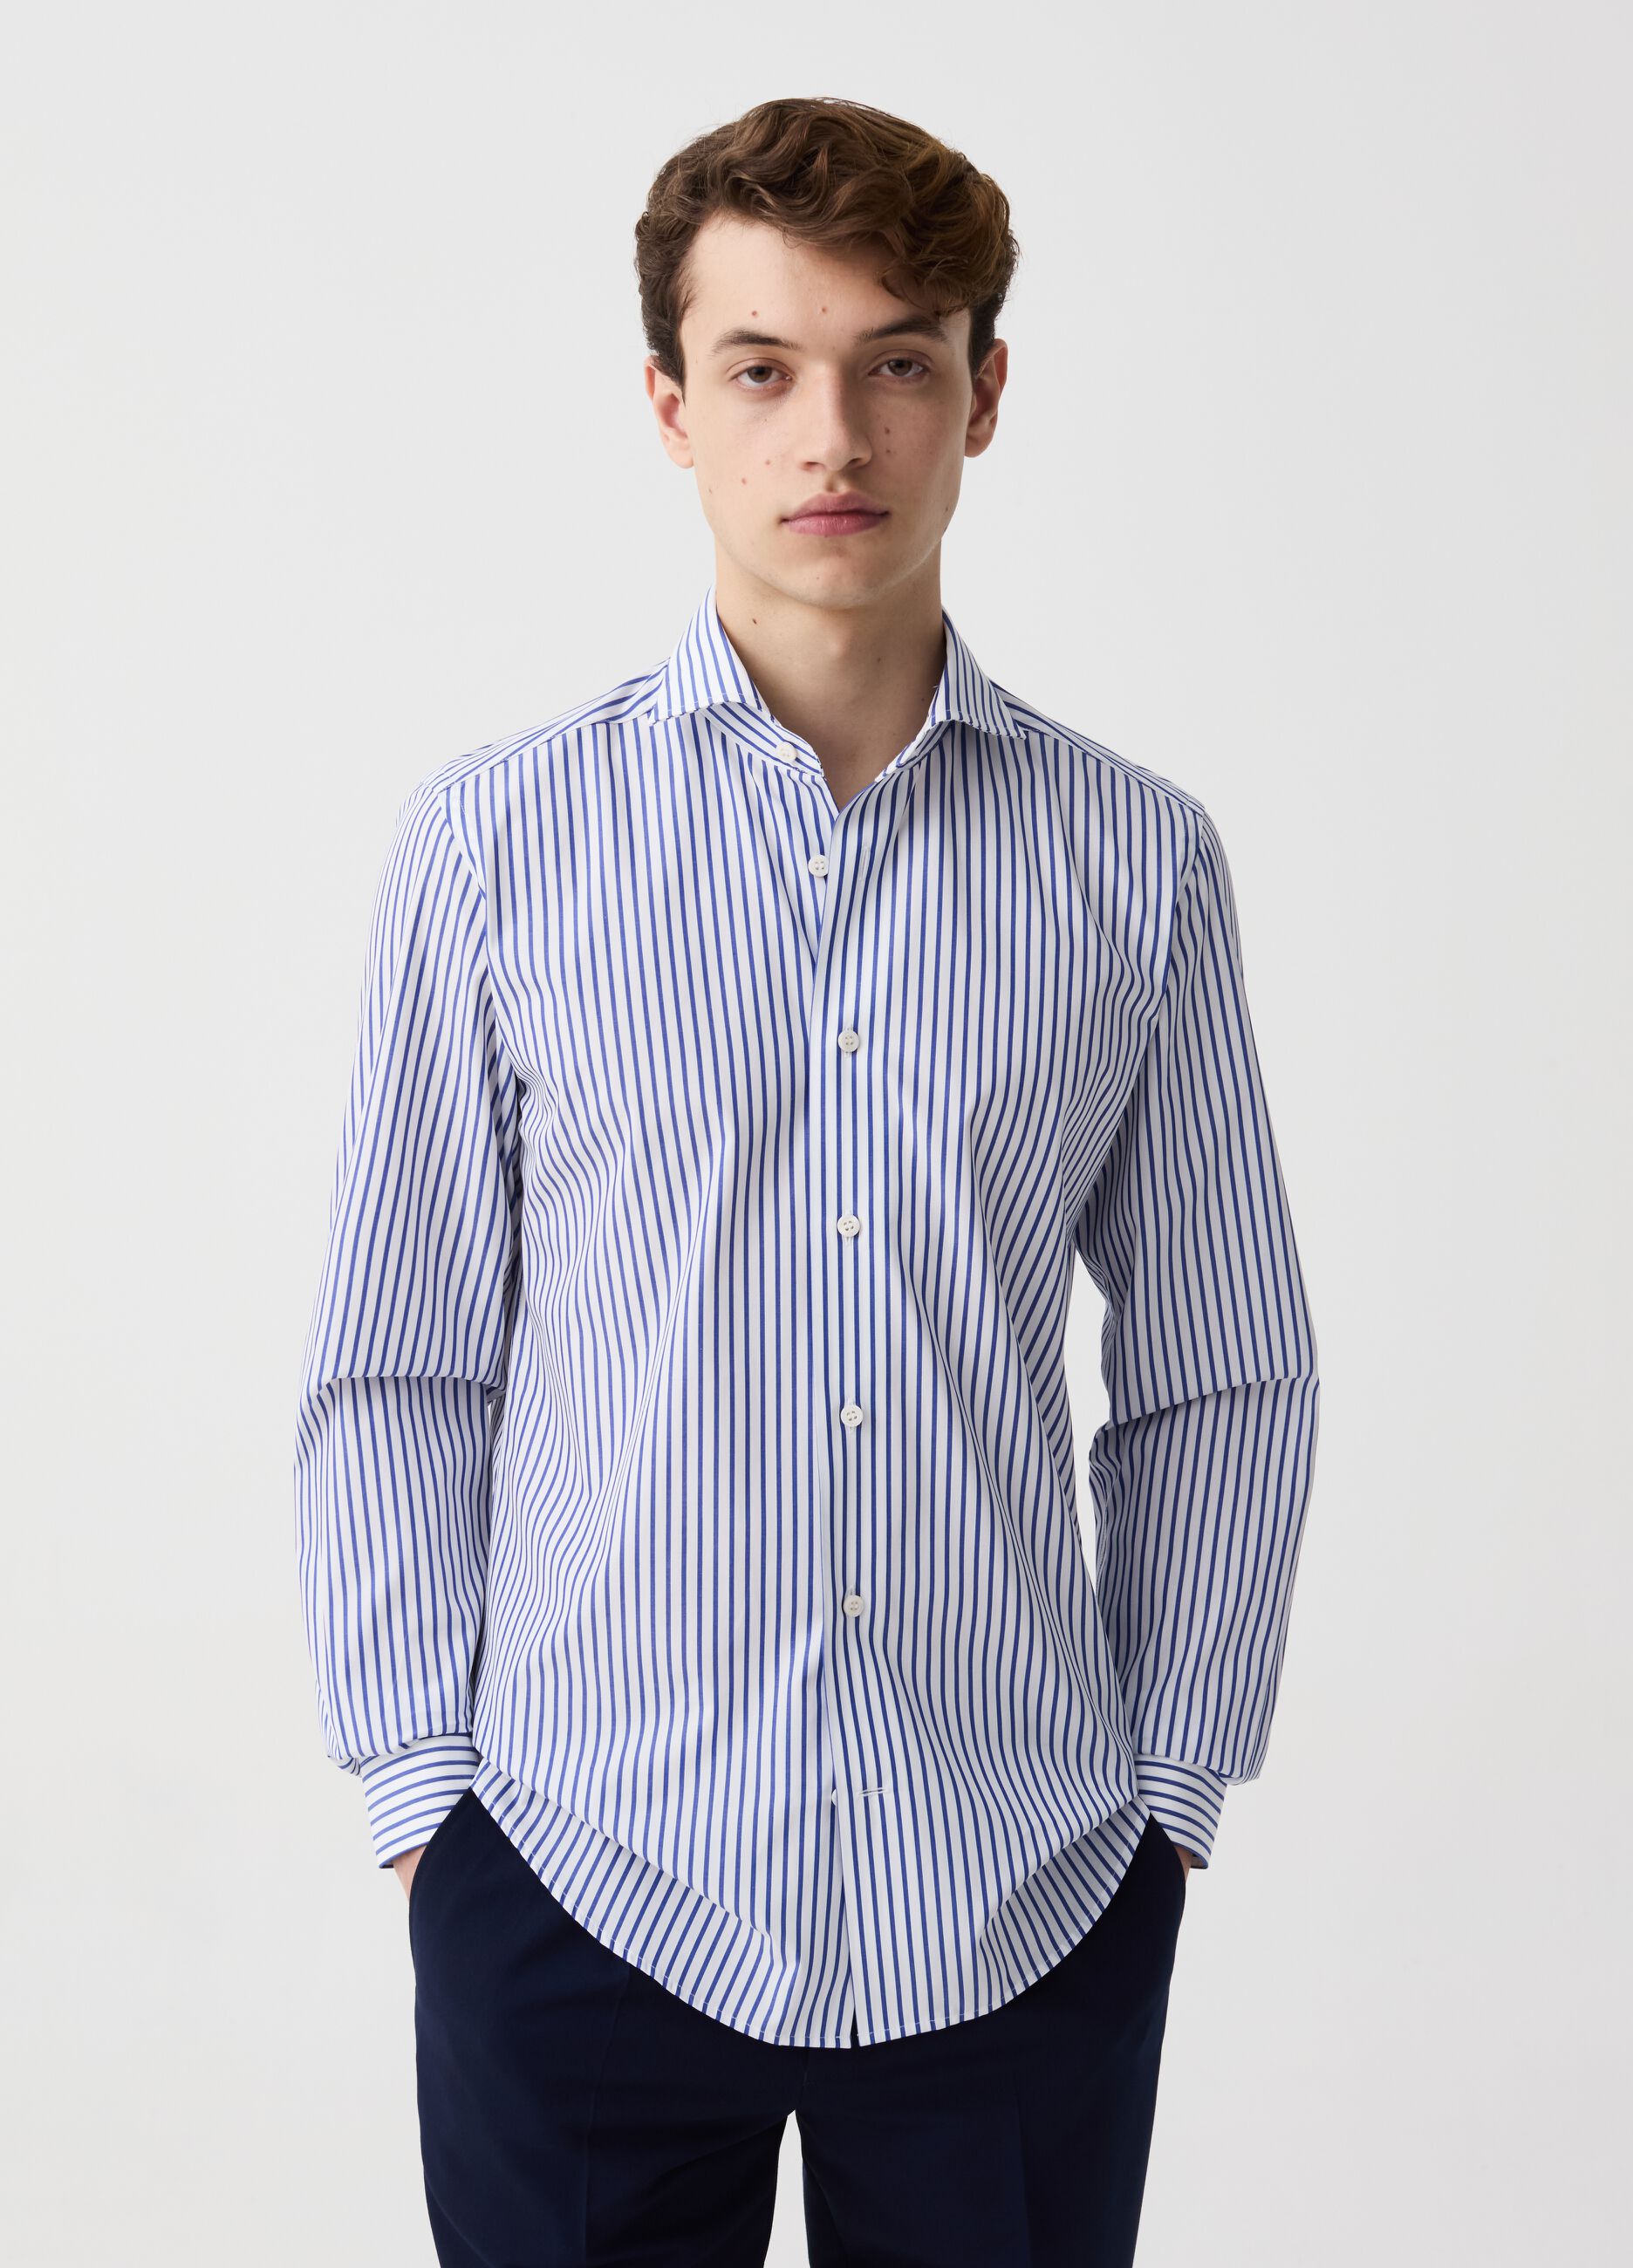 Slim-fit shirt in striped cotton